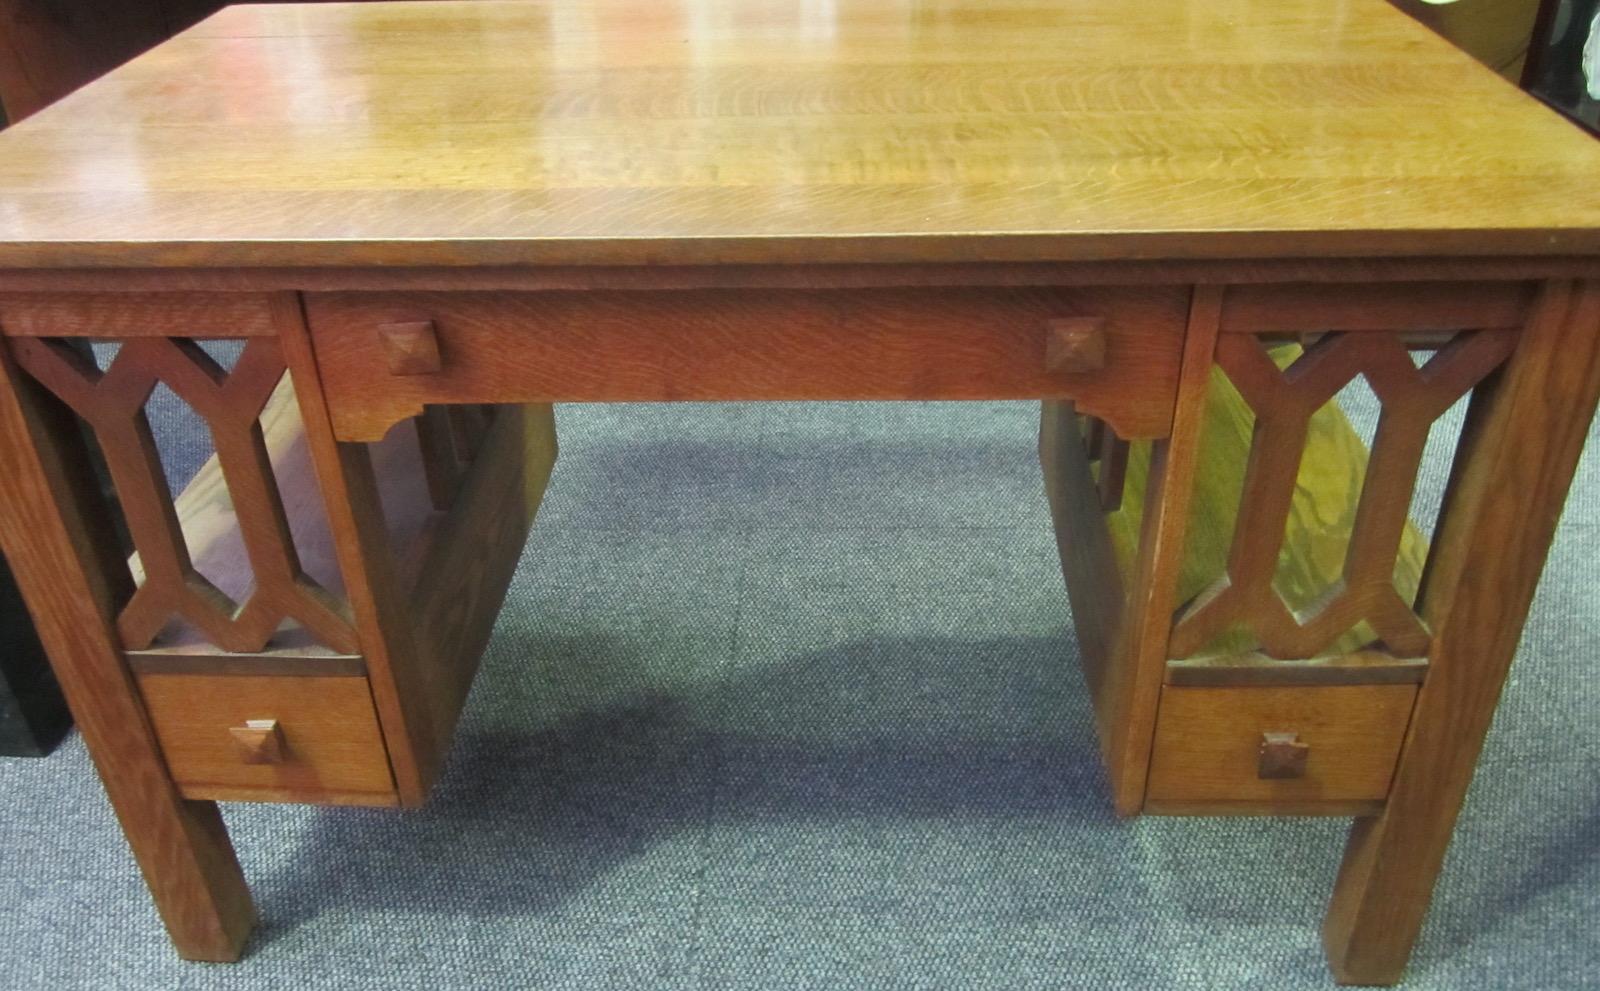 Early 20th Century American Arts & Crafts Period Mission Oak Desk For Sale